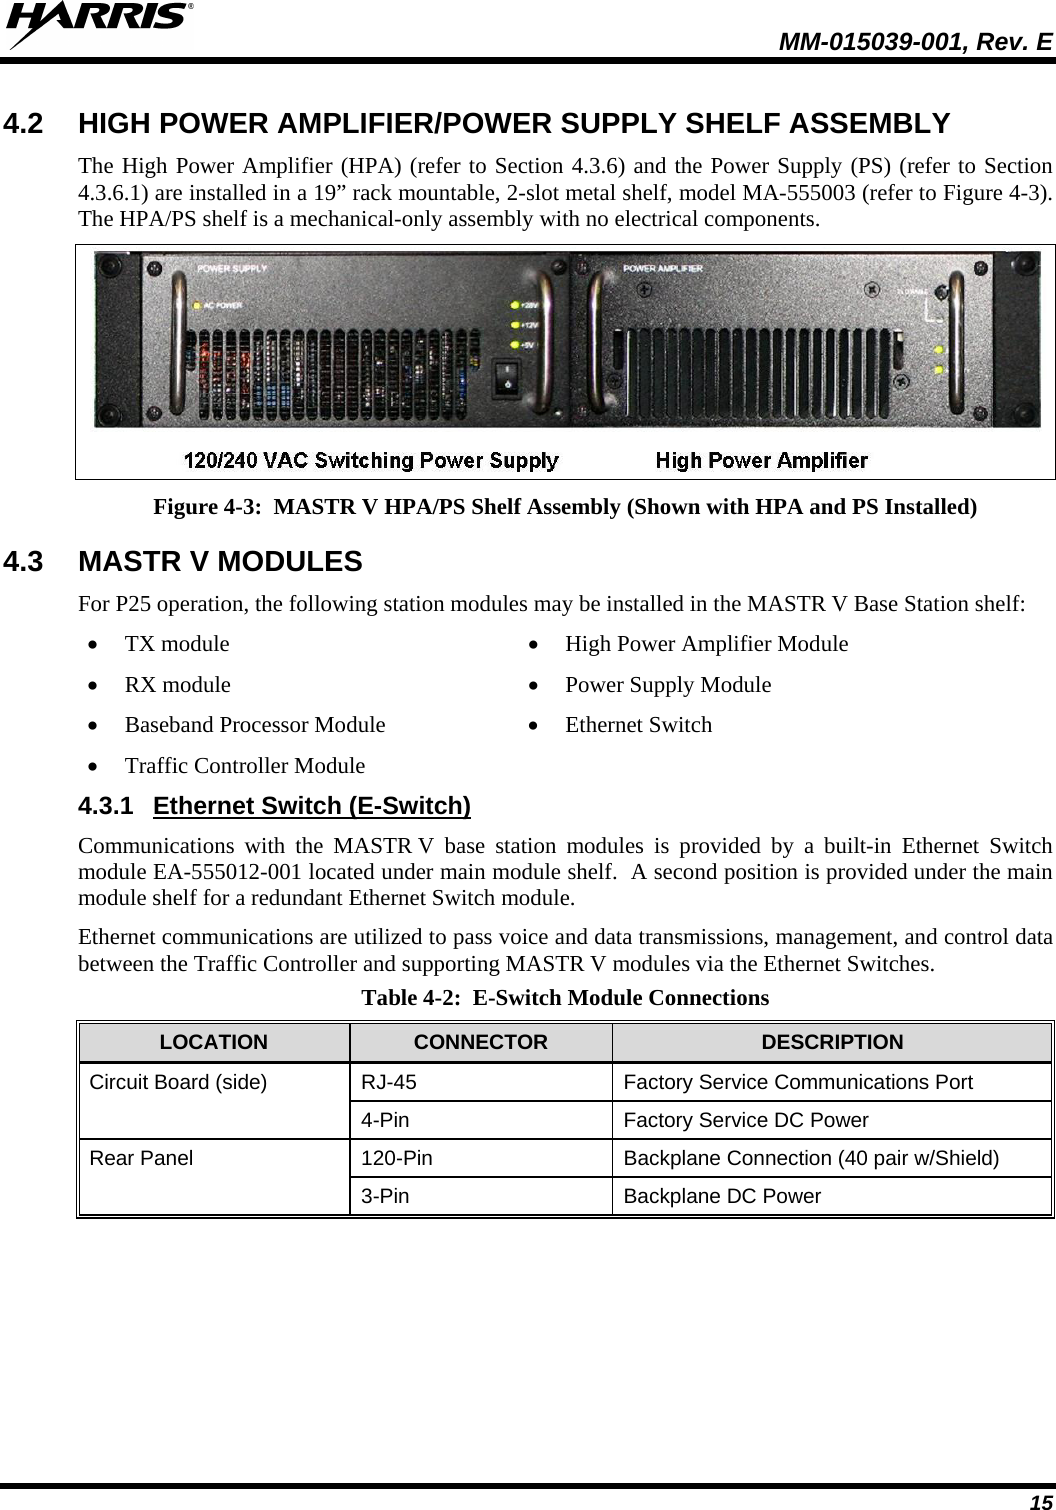   MM-015039-001, Rev. E 15 4.2 HIGH POWER AMPLIFIER/POWER SUPPLY SHELF ASSEMBLY The High Power Amplifier (HPA) (refer to Section 4.3.6) and the Power Supply (PS) (refer to Section 4.3.6.1) are installed in a 19” rack mountable, 2-slot metal shelf, model MA-555003 (refer to Figure 4-3).  The HPA/PS shelf is a mechanical-only assembly with no electrical components.  Figure 4-3:  MASTR V HPA/PS Shelf Assembly (Shown with HPA and PS Installed) 4.3 MASTR V MODULES For P25 operation, the following station modules may be installed in the MASTR V Base Station shelf: • TX module • RX module • Baseband Processor Module • Traffic Controller Module • High Power Amplifier Module • Power Supply Module • Ethernet Switch 4.3.1 Ethernet Switch (E-Switch) Communications with the MASTR V base station modules is provided by a built-in Ethernet Switch module EA-555012-001 located under main module shelf.  A second position is provided under the main module shelf for a redundant Ethernet Switch module. Ethernet communications are utilized to pass voice and data transmissions, management, and control data between the Traffic Controller and supporting MASTR V modules via the Ethernet Switches.   Table 4-2:  E-Switch Module Connections LOCATION  CONNECTOR  DESCRIPTION Circuit Board (side) RJ-45 Factory Service Communications Port 4-Pin Factory Service DC Power  Rear Panel 120-Pin Backplane Connection (40 pair w/Shield) 3-Pin Backplane DC Power  